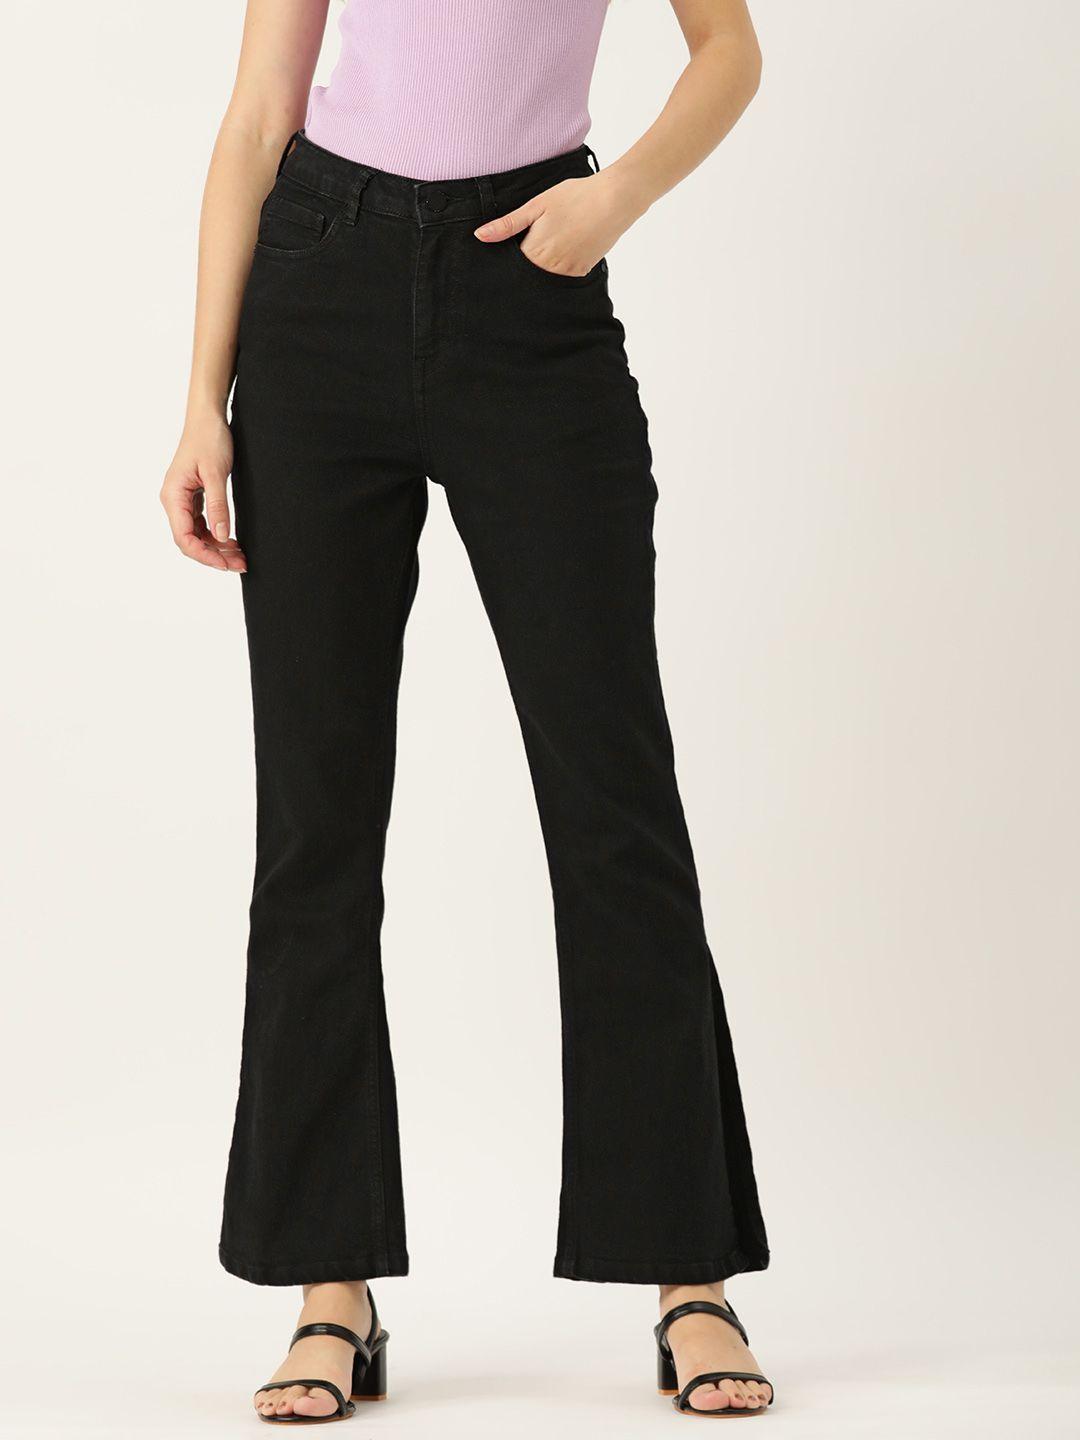 dressberry-women-bootcut-stretchable-jeans